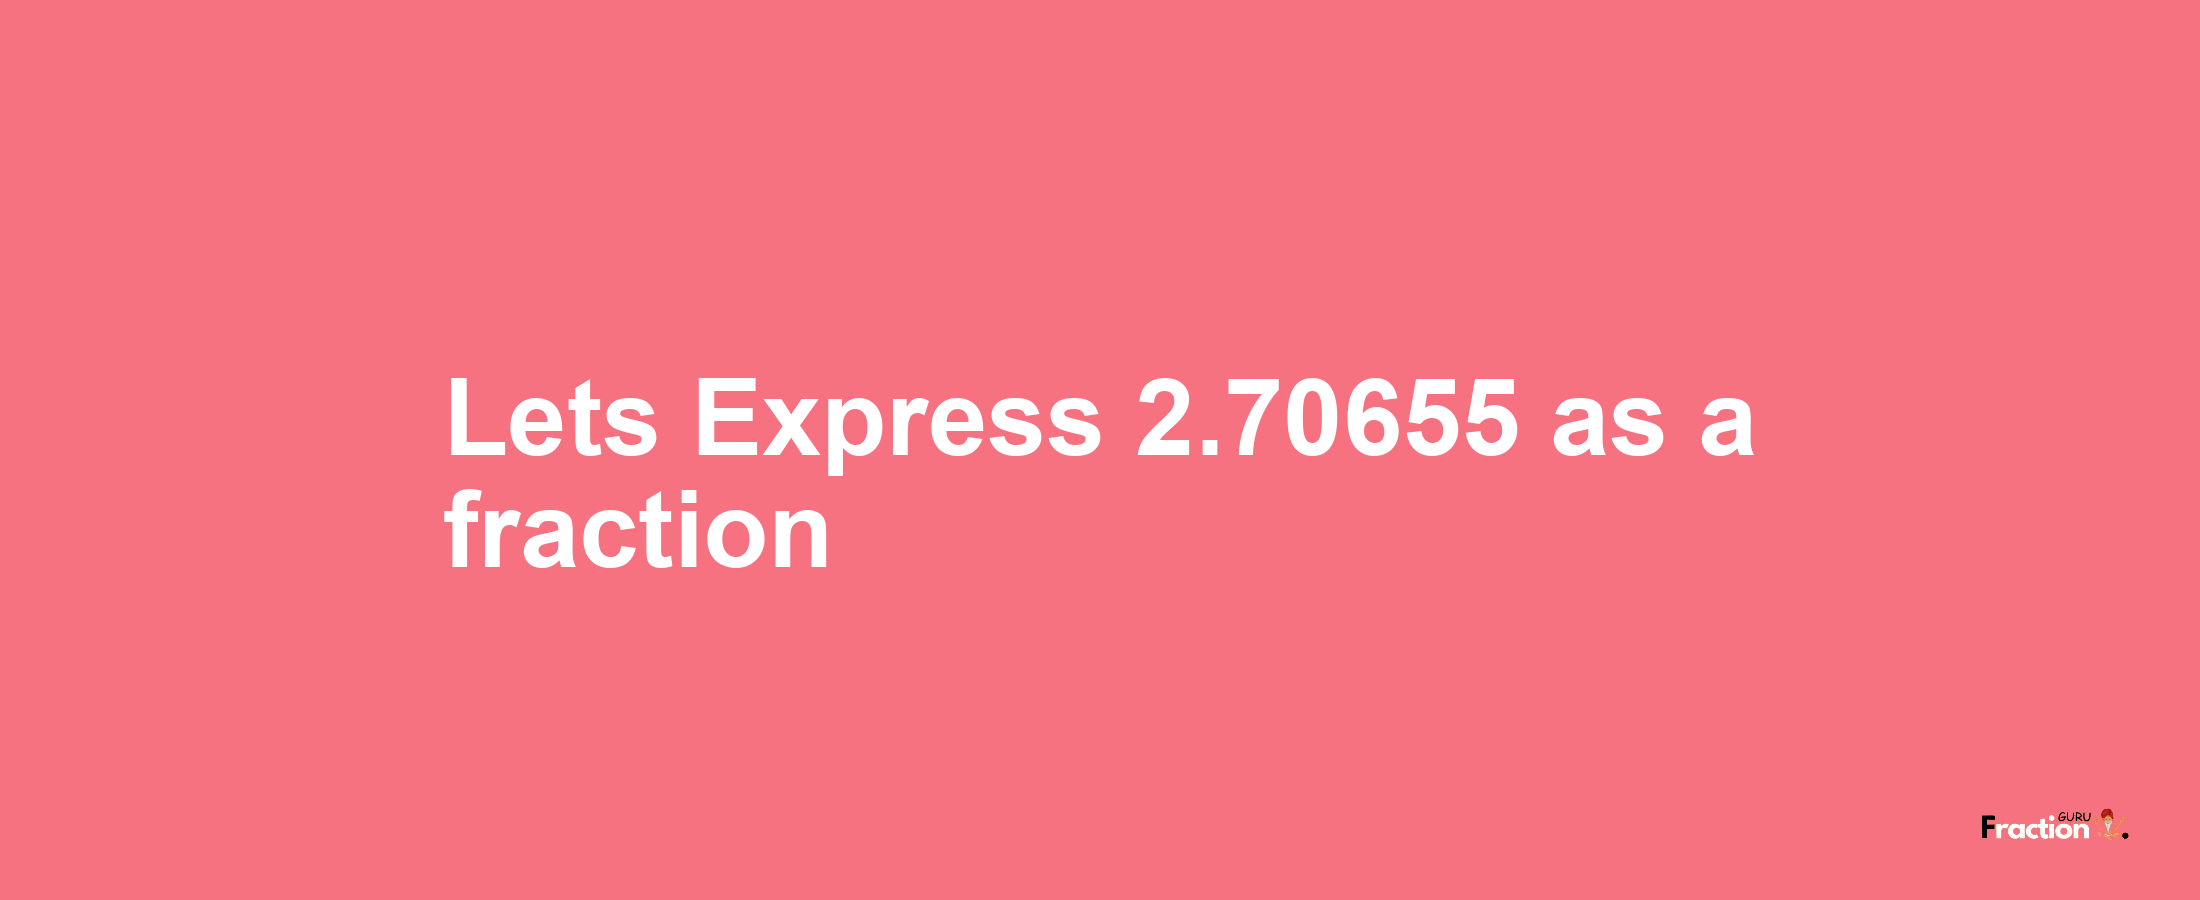 Lets Express 2.70655 as afraction